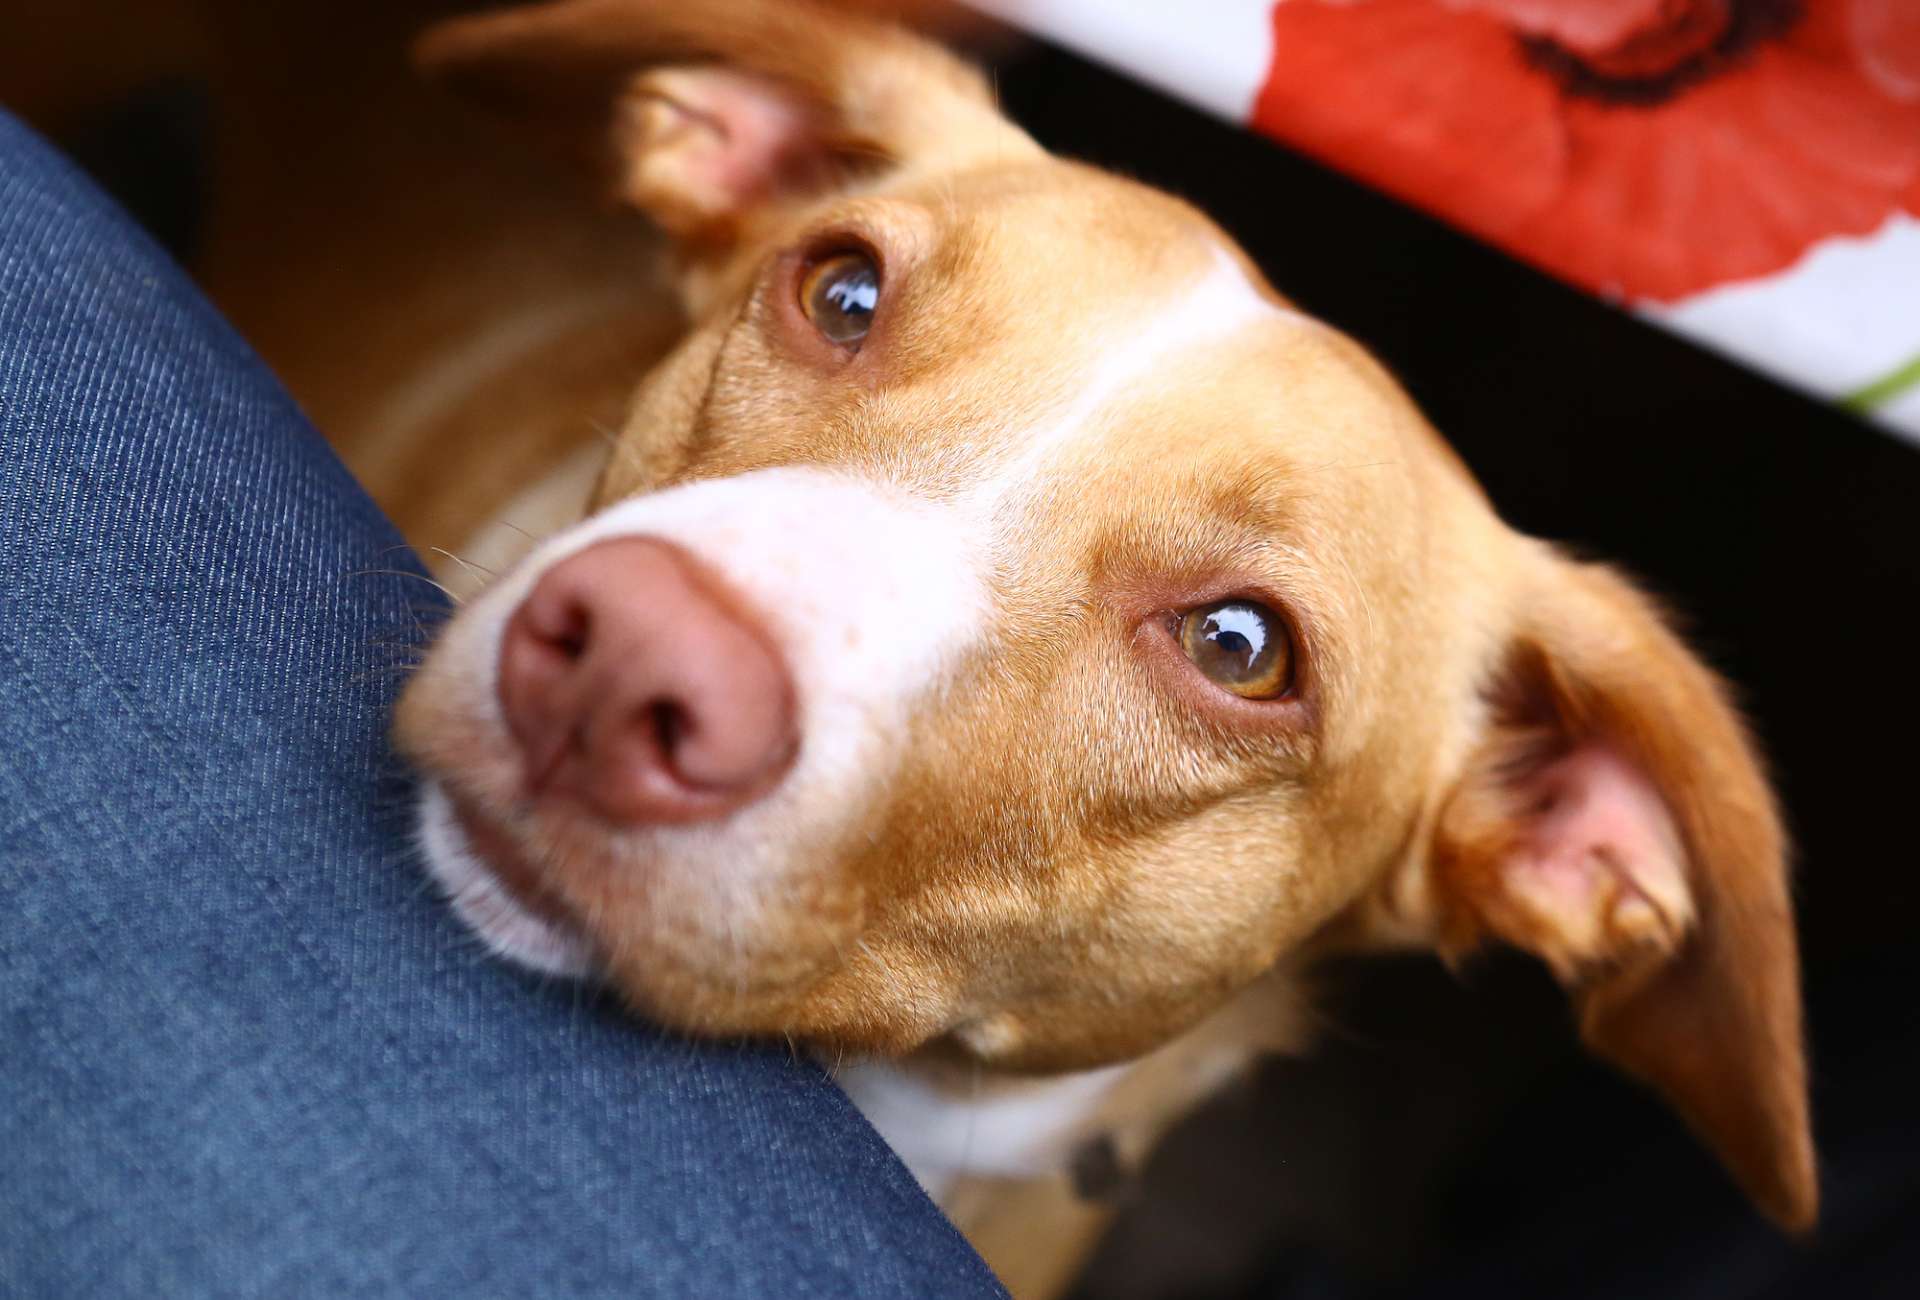 Dog places their snout on a person's leg and looks at them with soft eyes.